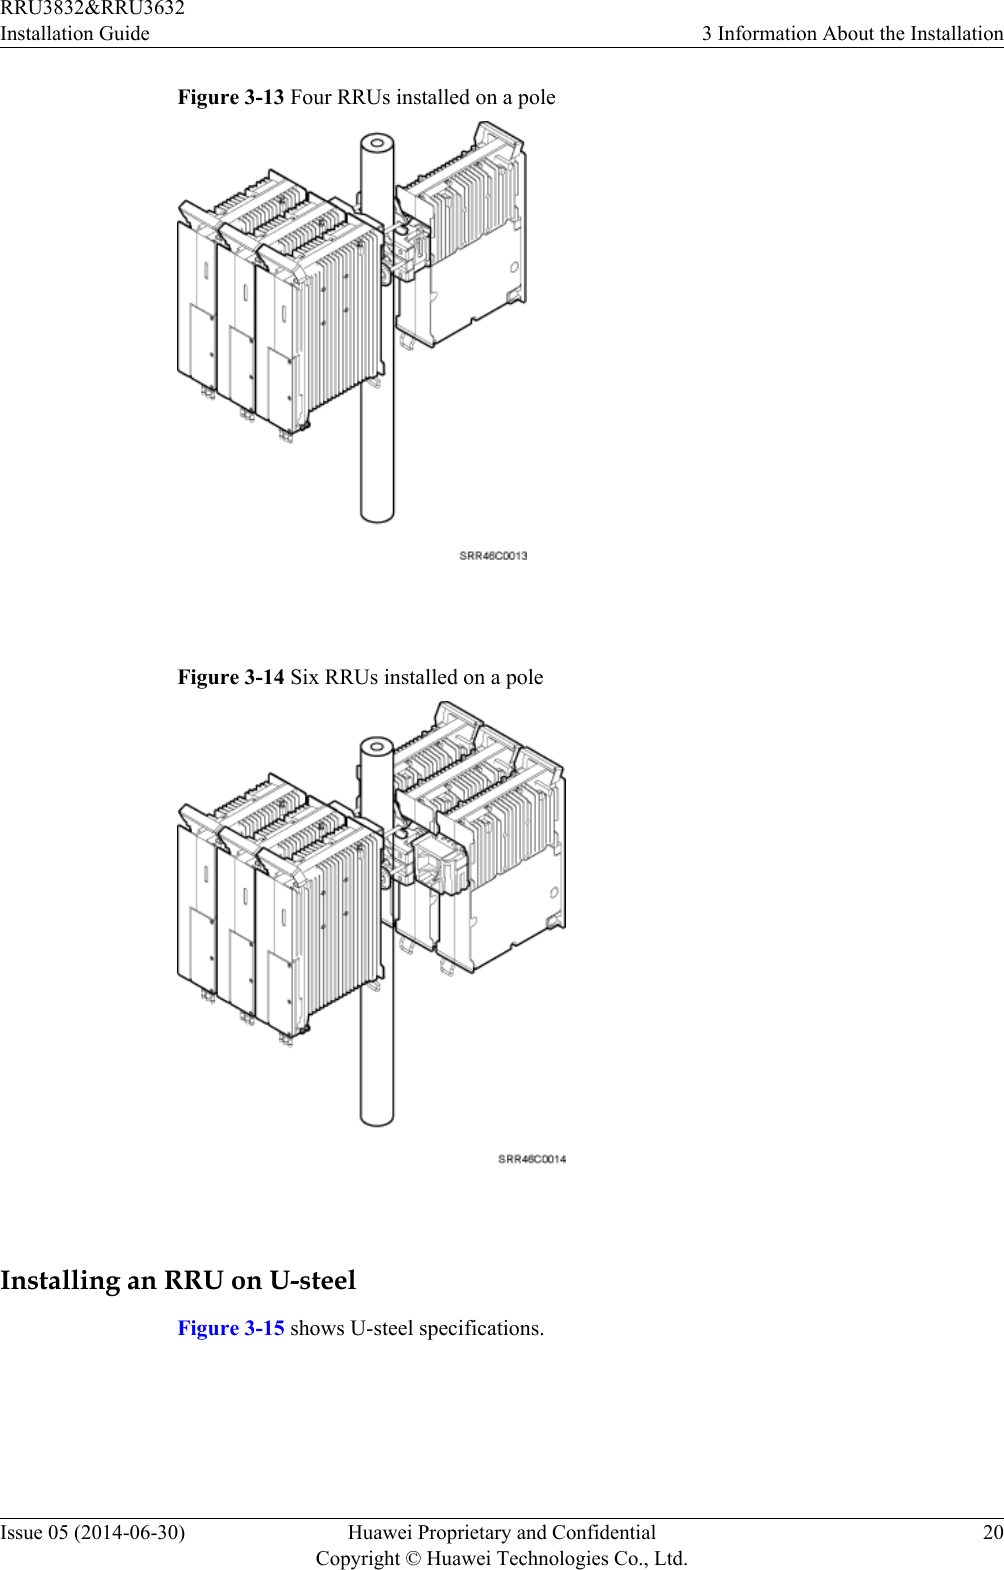 Figure 3-13 Four RRUs installed on a pole Figure 3-14 Six RRUs installed on a pole Installing an RRU on U-steelFigure 3-15 shows U-steel specifications.RRU3832&amp;RRU3632Installation Guide 3 Information About the InstallationIssue 05 (2014-06-30) Huawei Proprietary and ConfidentialCopyright © Huawei Technologies Co., Ltd.20